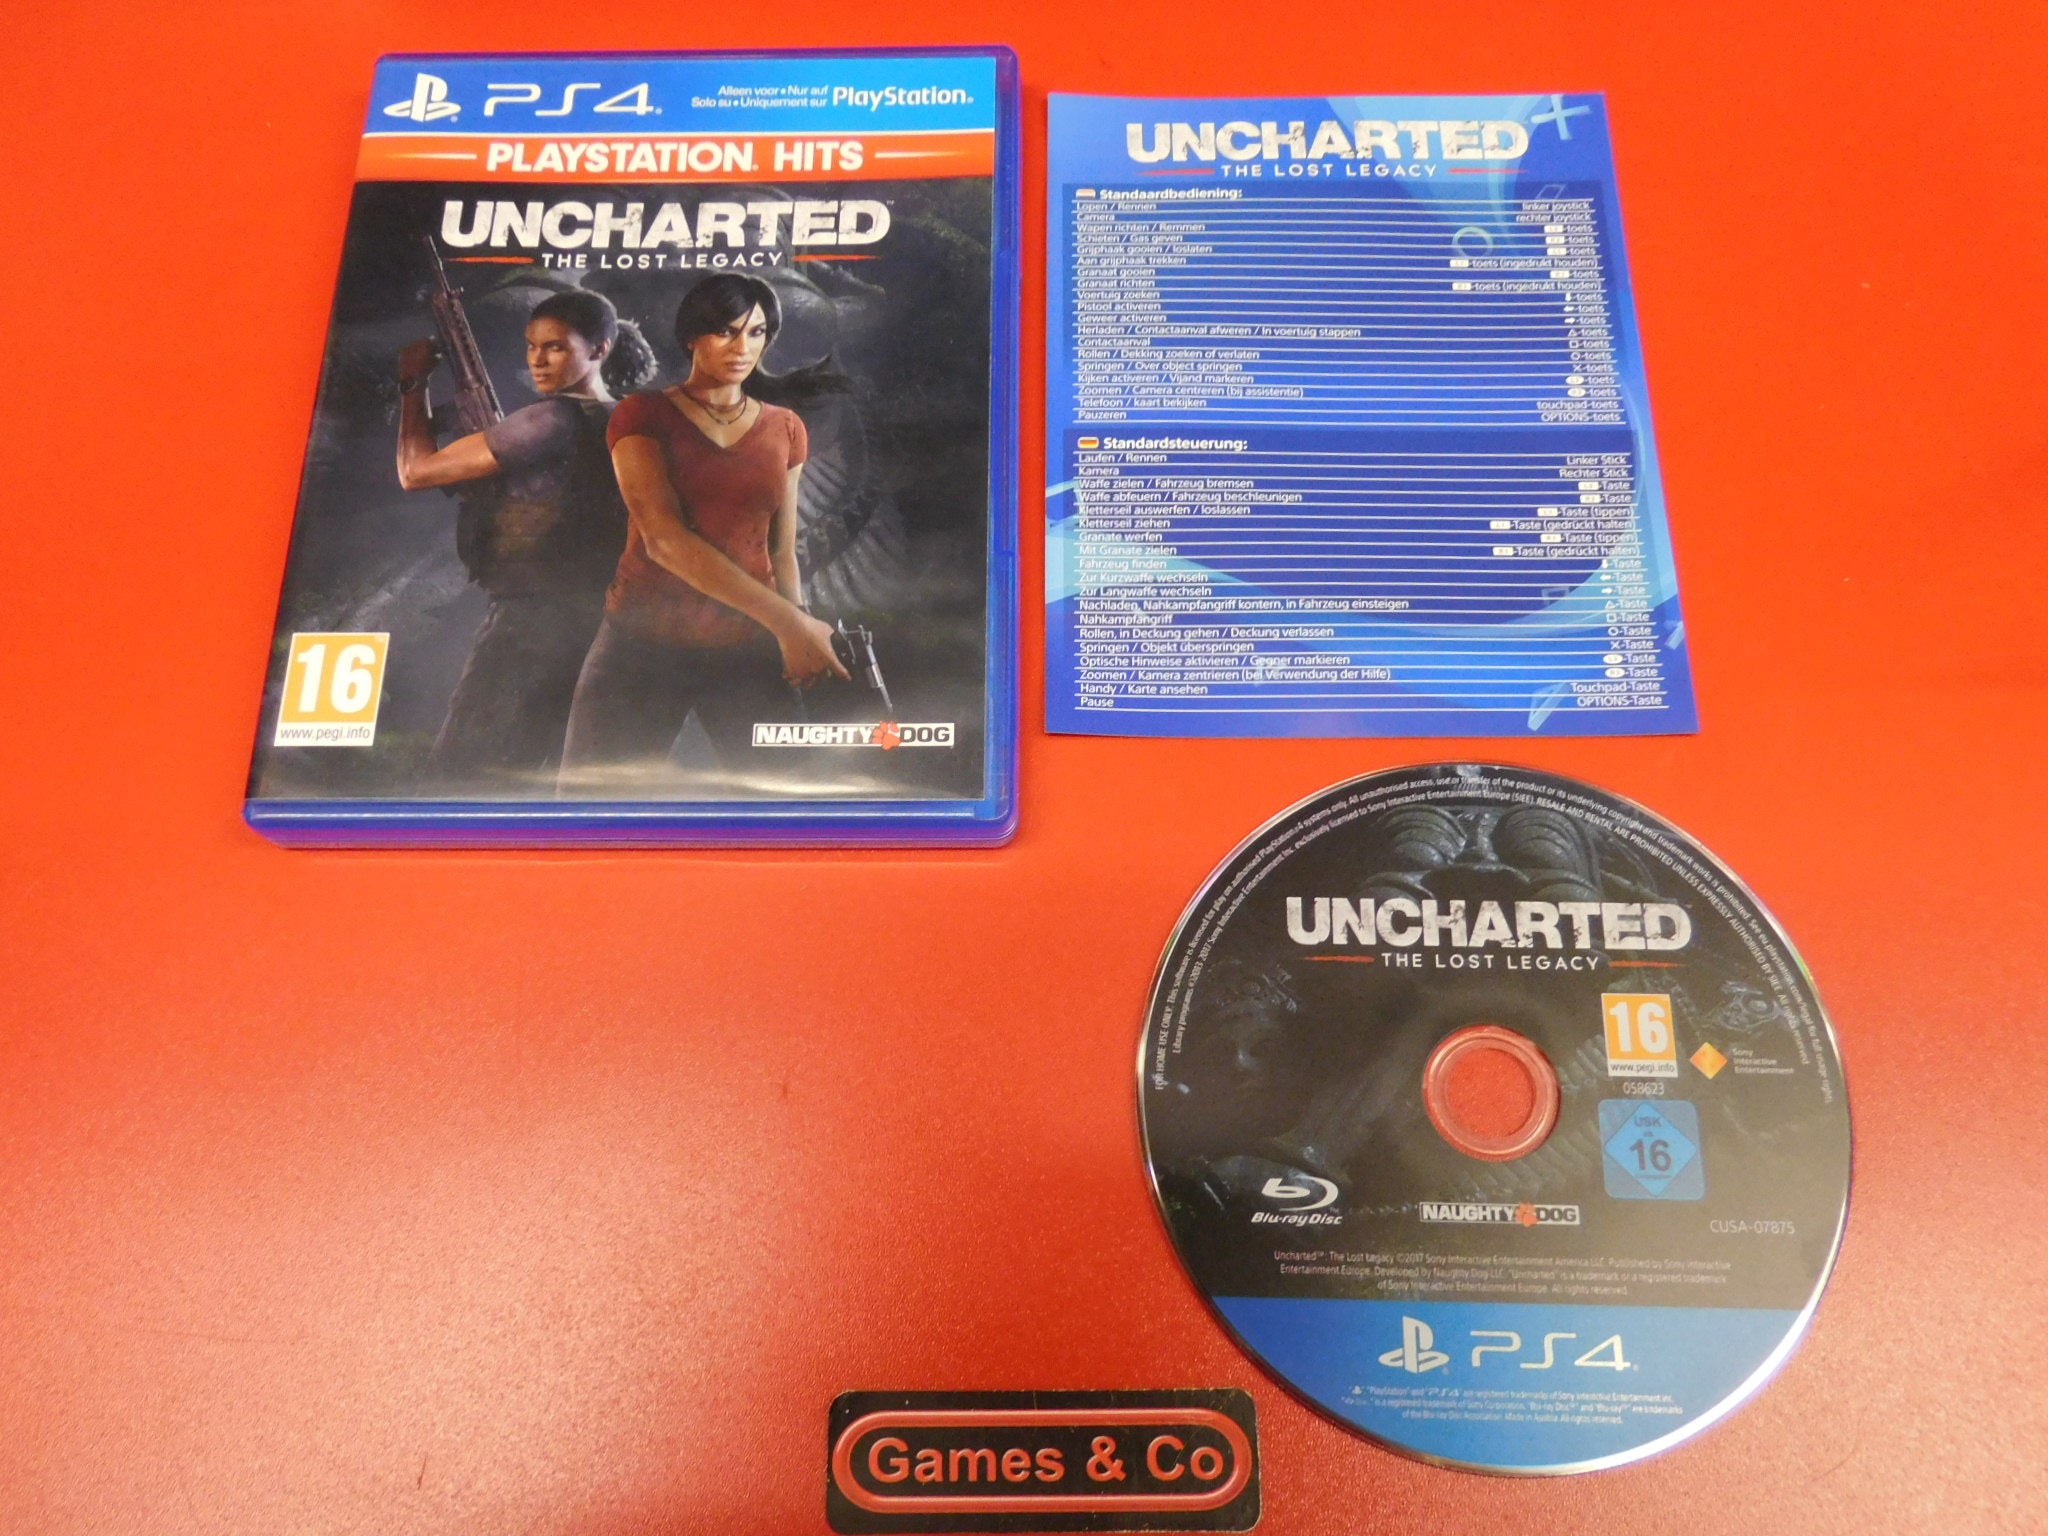 UNCHARTED THE LOST LEGACY